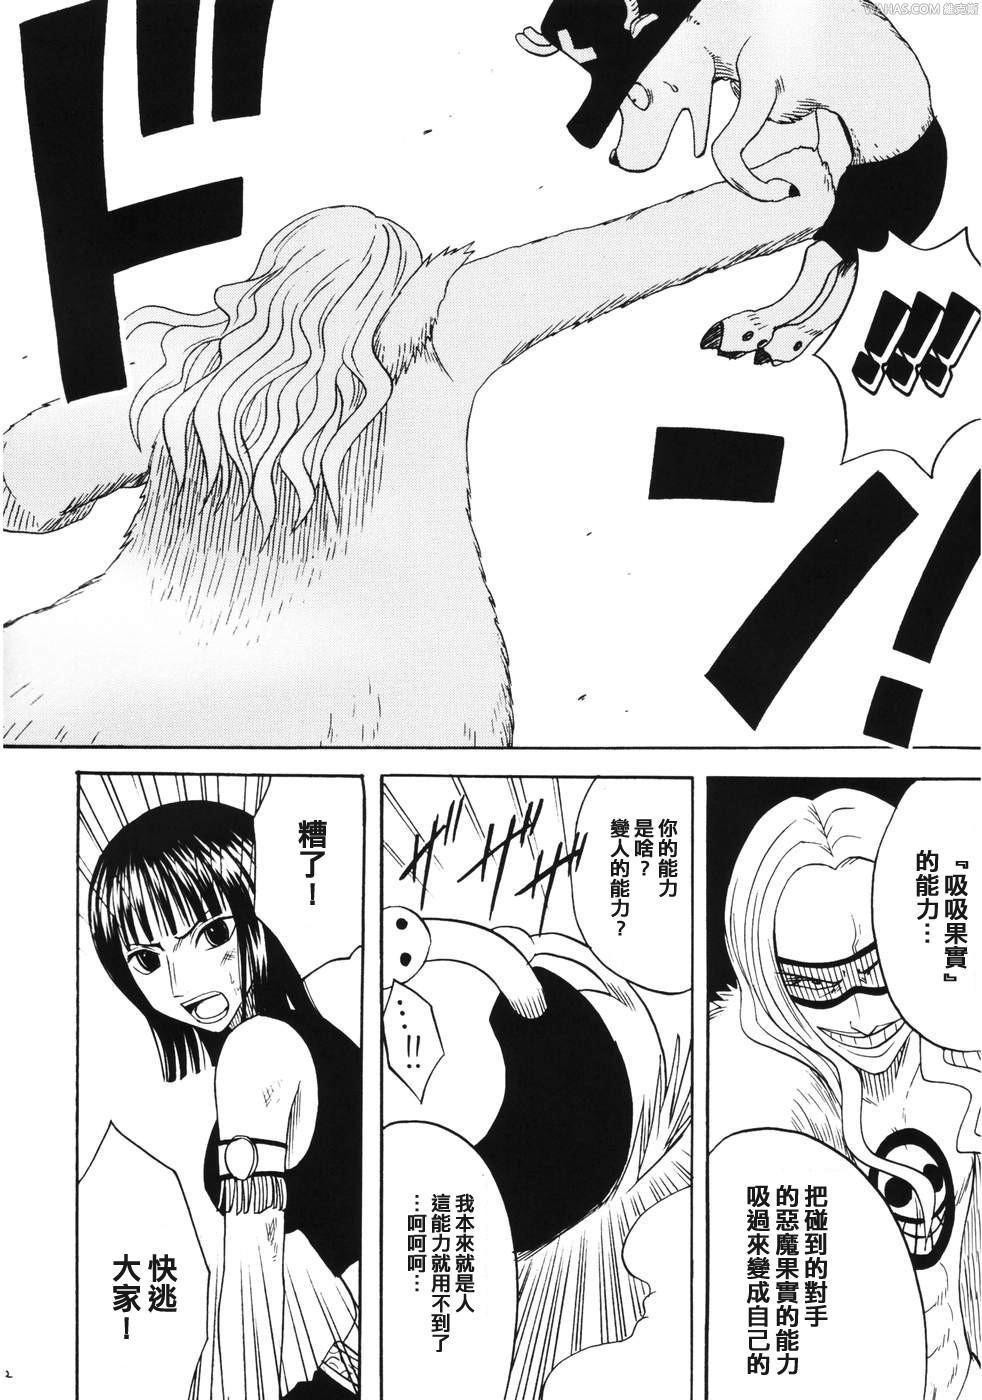 Masterbation Dancing Animation Run - One piece Gorgeous - Page 11